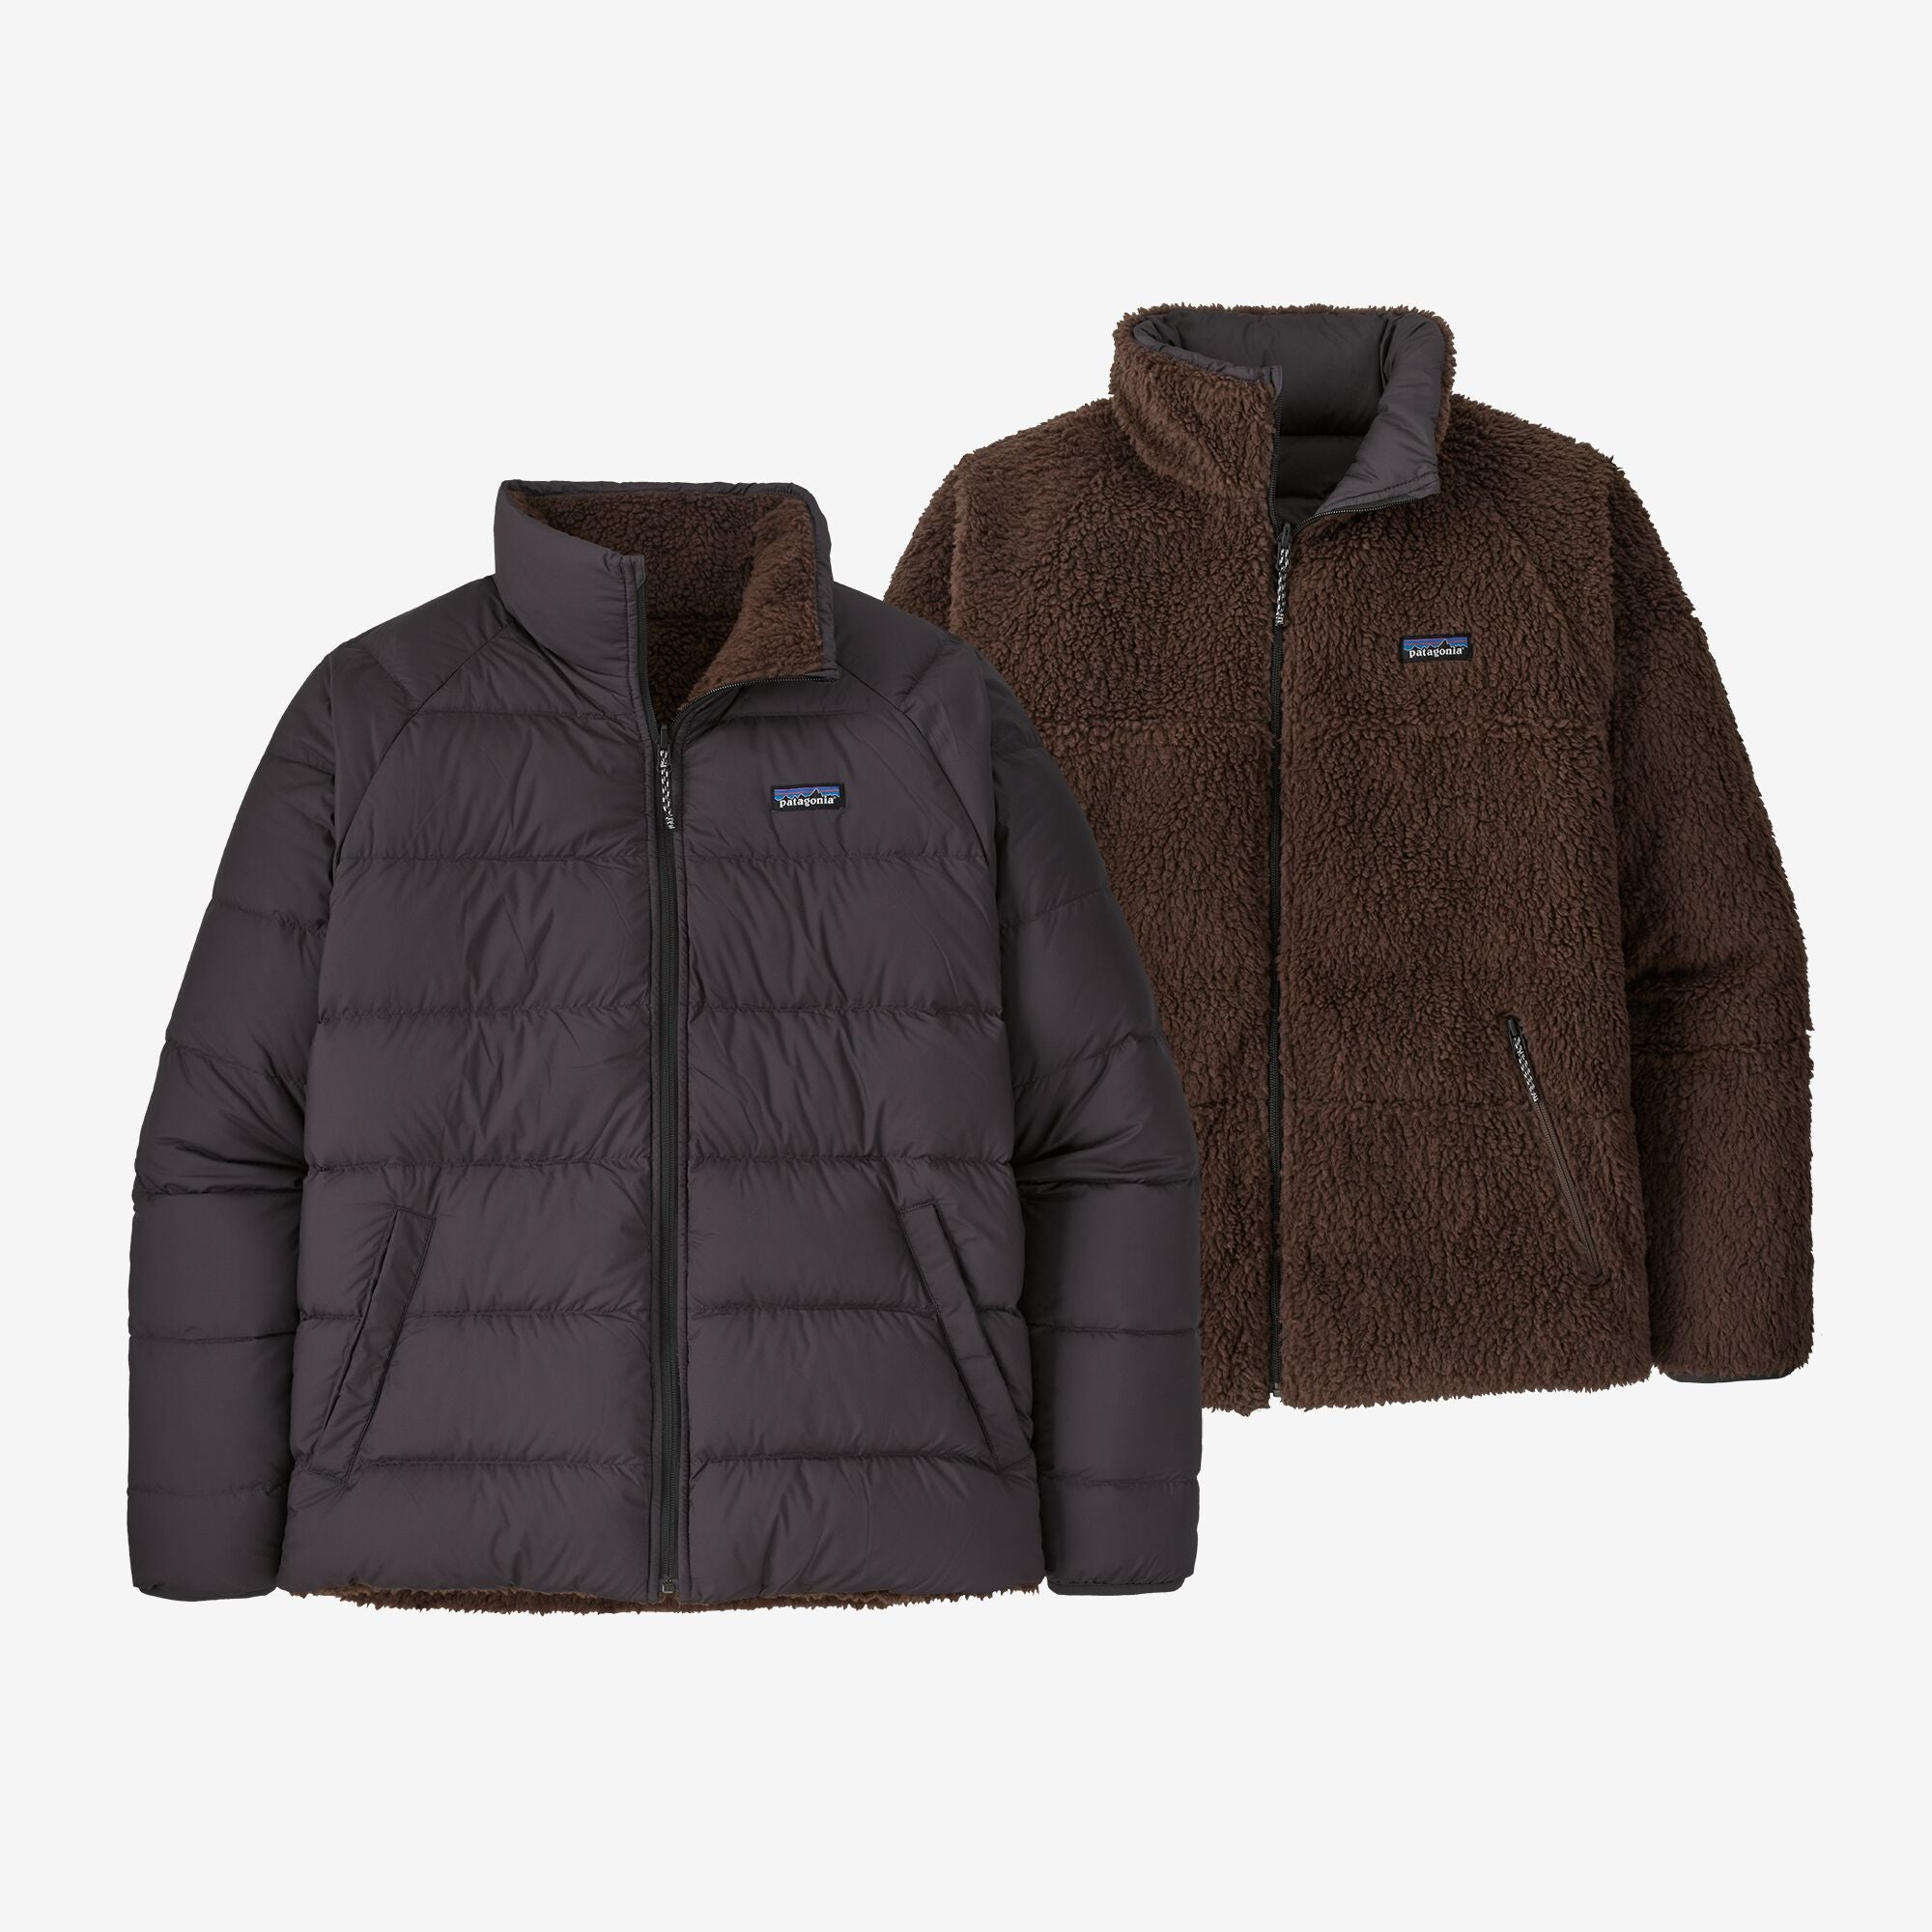 Silent Down Jacket by Patagonia Online, THE ICONIC